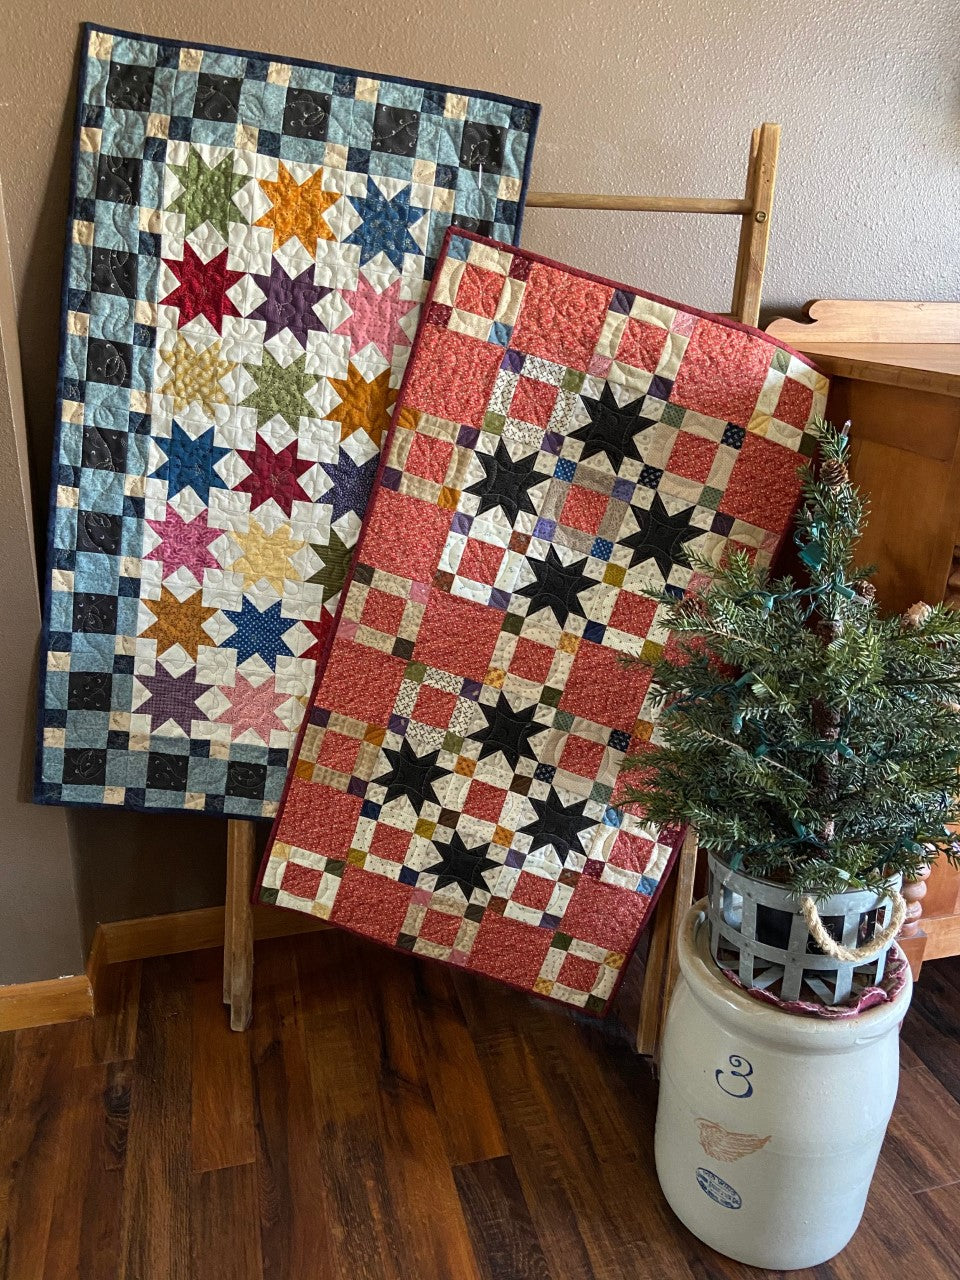 Scrappy table runner quilt patterns designed by Deanne Eisenman for Snuggles Quilts